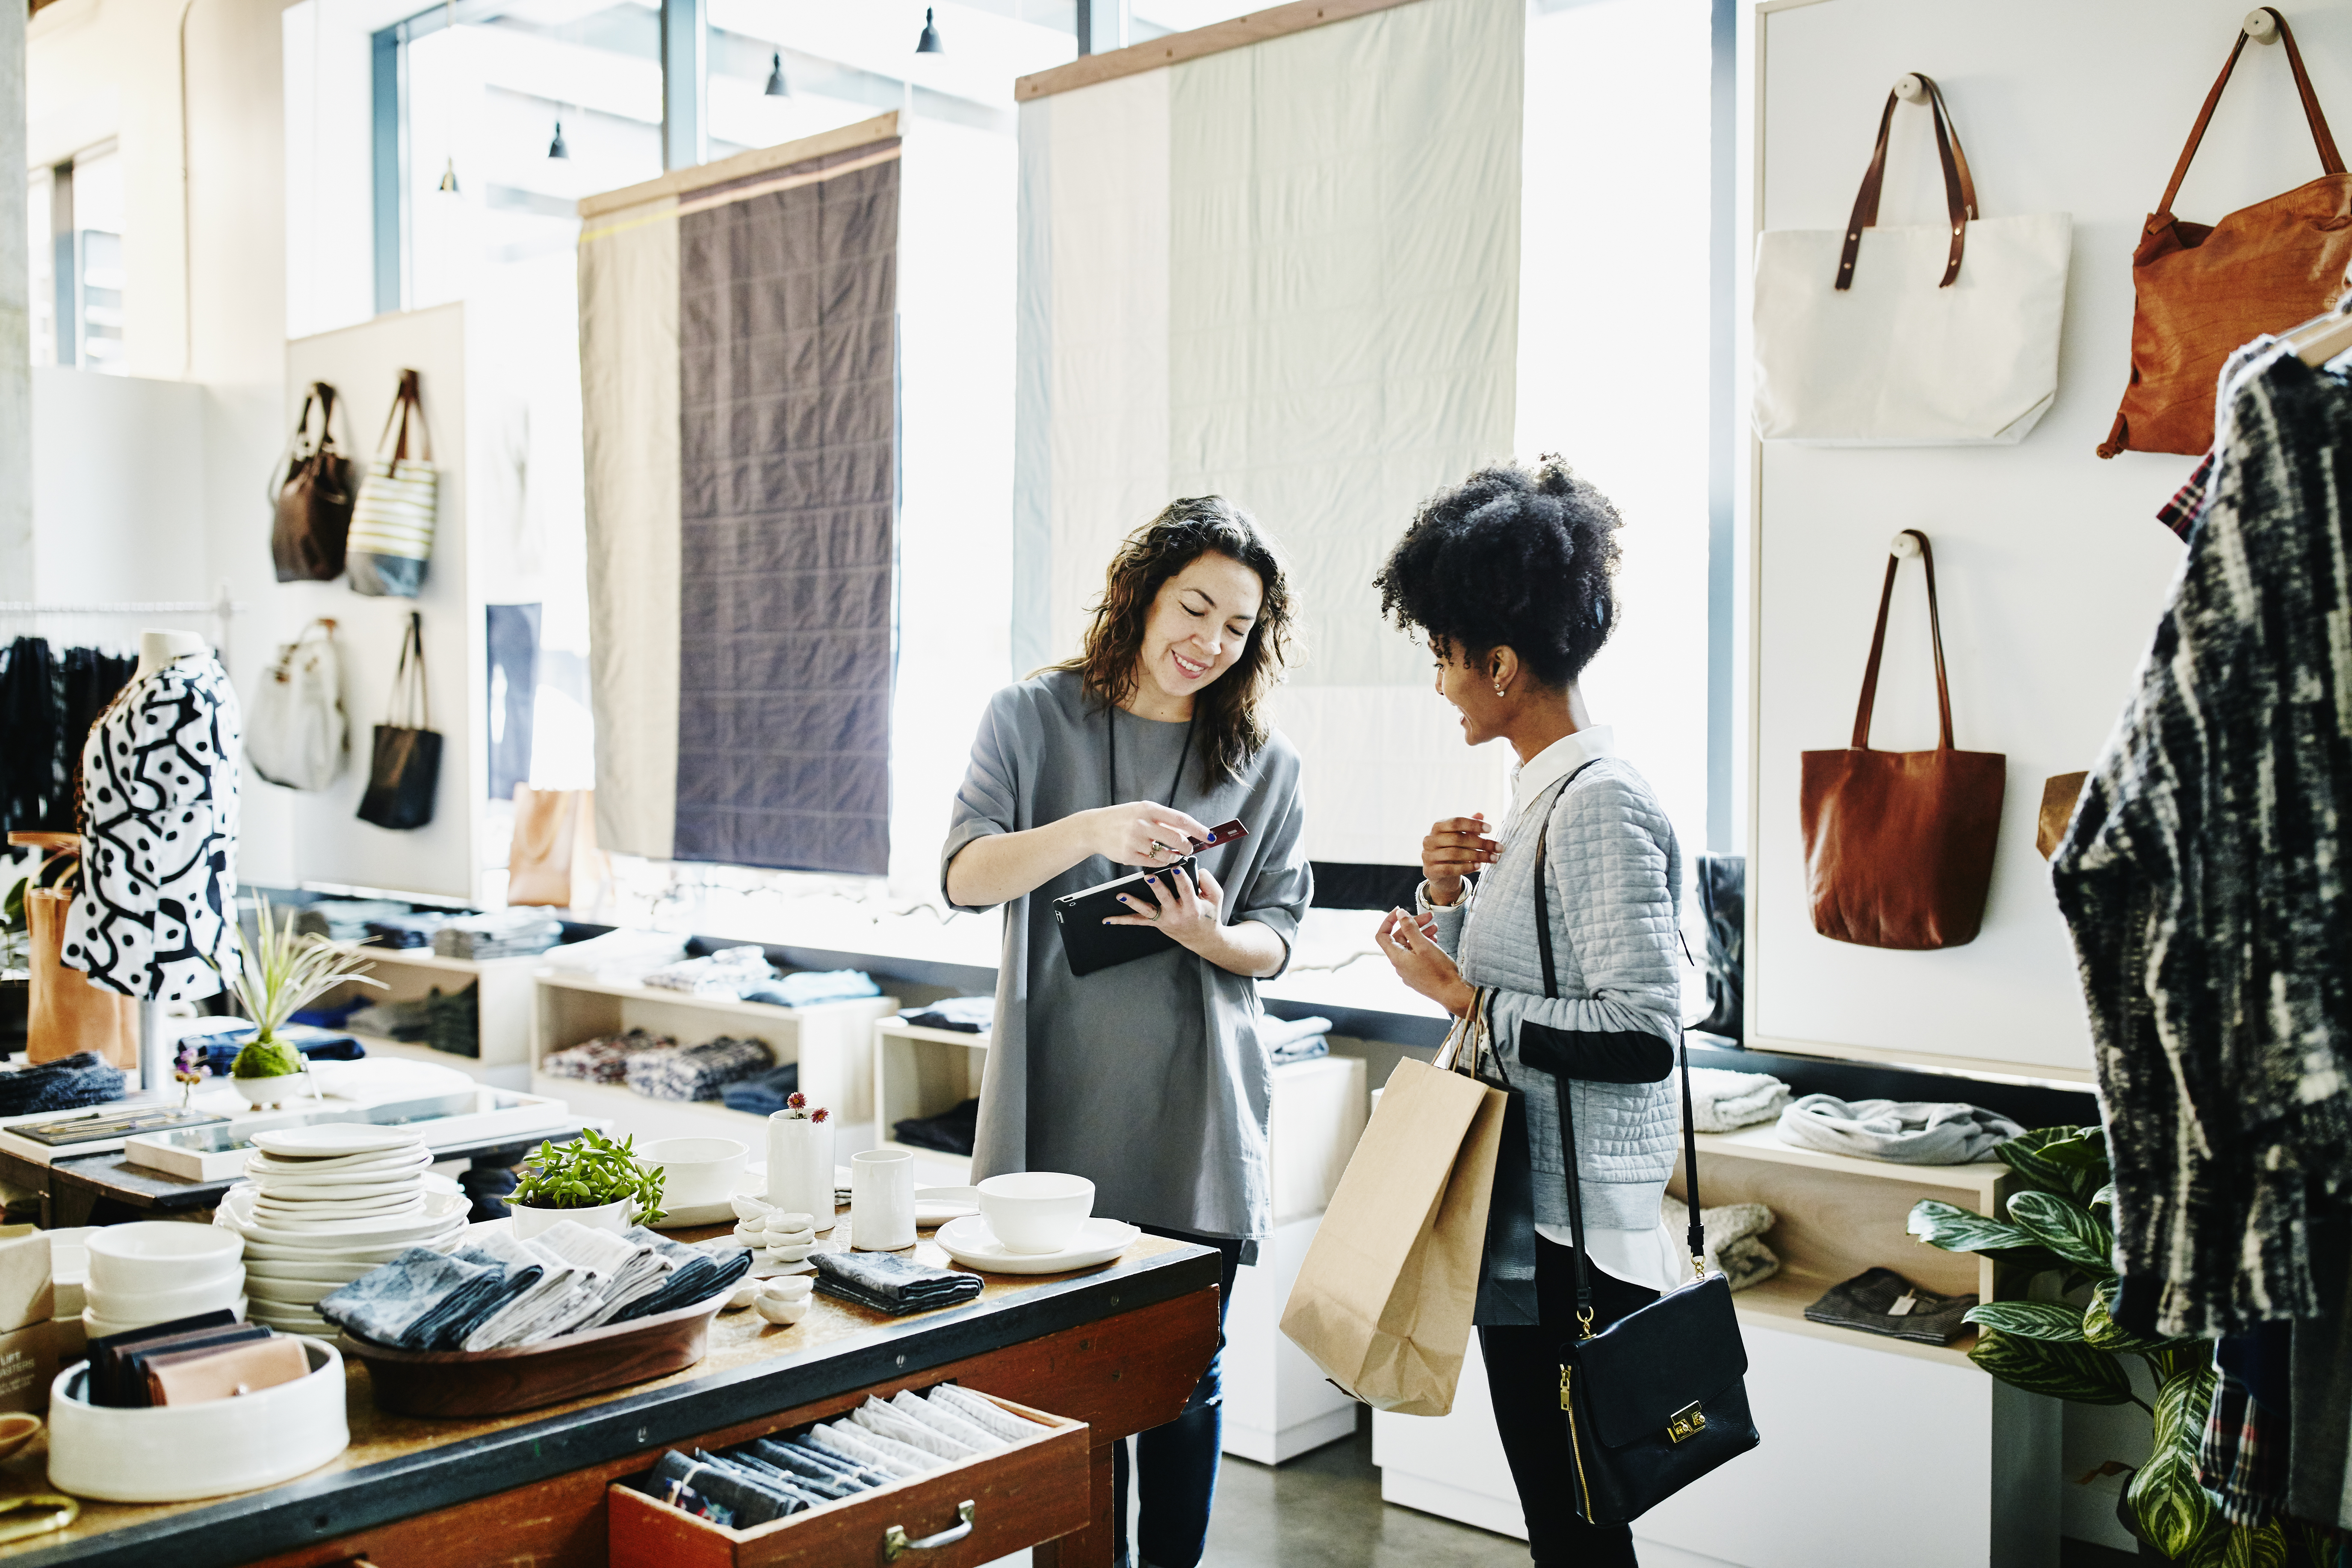 Retail 2040: The Evolution of Consumer Expectations